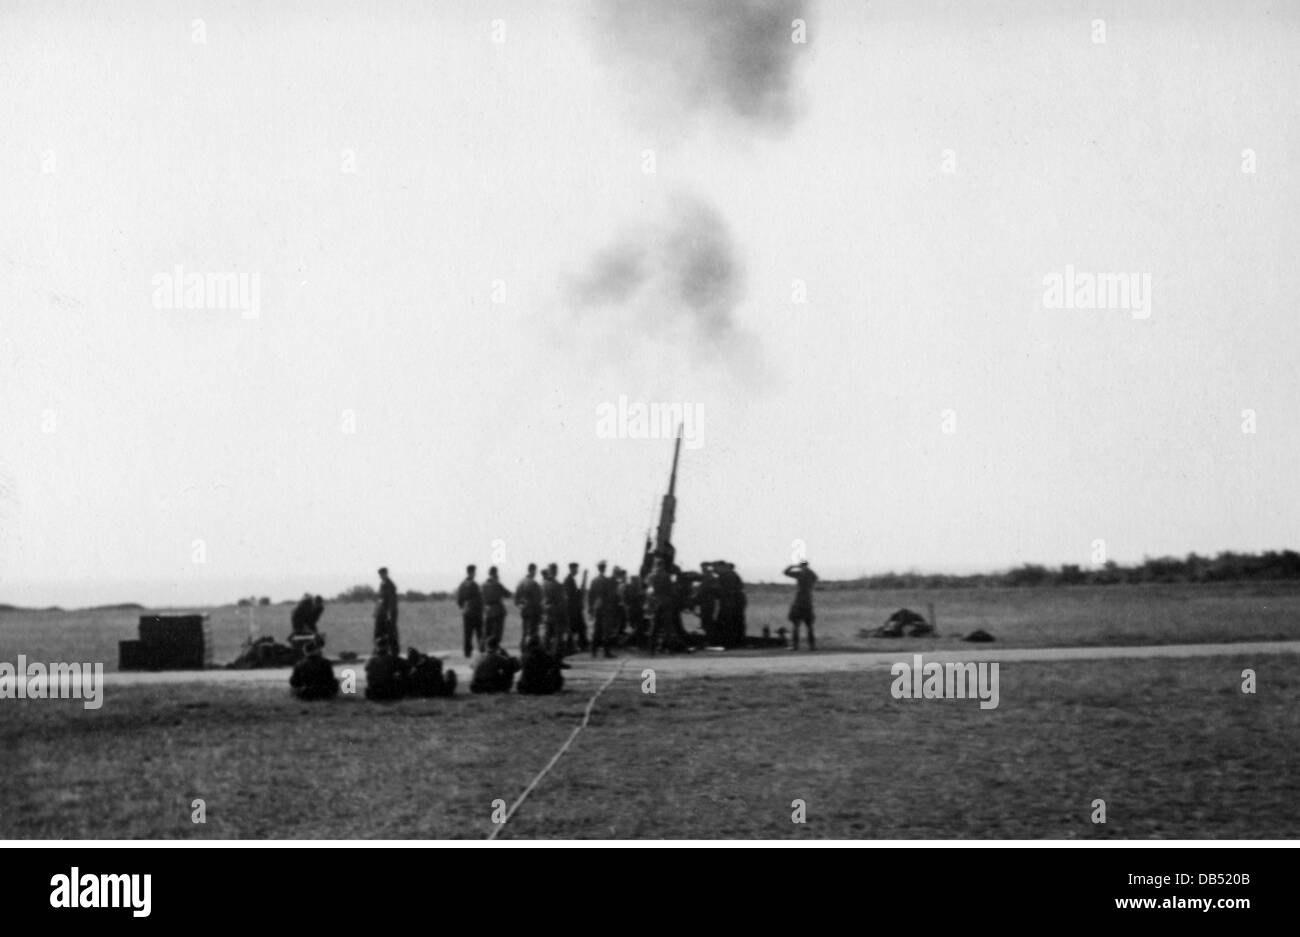 Nazism / National Socialism, military, Wehrmacht, Luftwaffe, anti-aircraft artillery school Wustrow, Germany, training, firing practice with heavy 88 mm AA gun Flak 18, 1939, 8.8 cm, Rerik, Mecklenburg, air defense, defence, Third Reich, guns, 20th century, historic, historical, people, 1930s, Additional-Rights-Clearences-Not Available Stock Photo